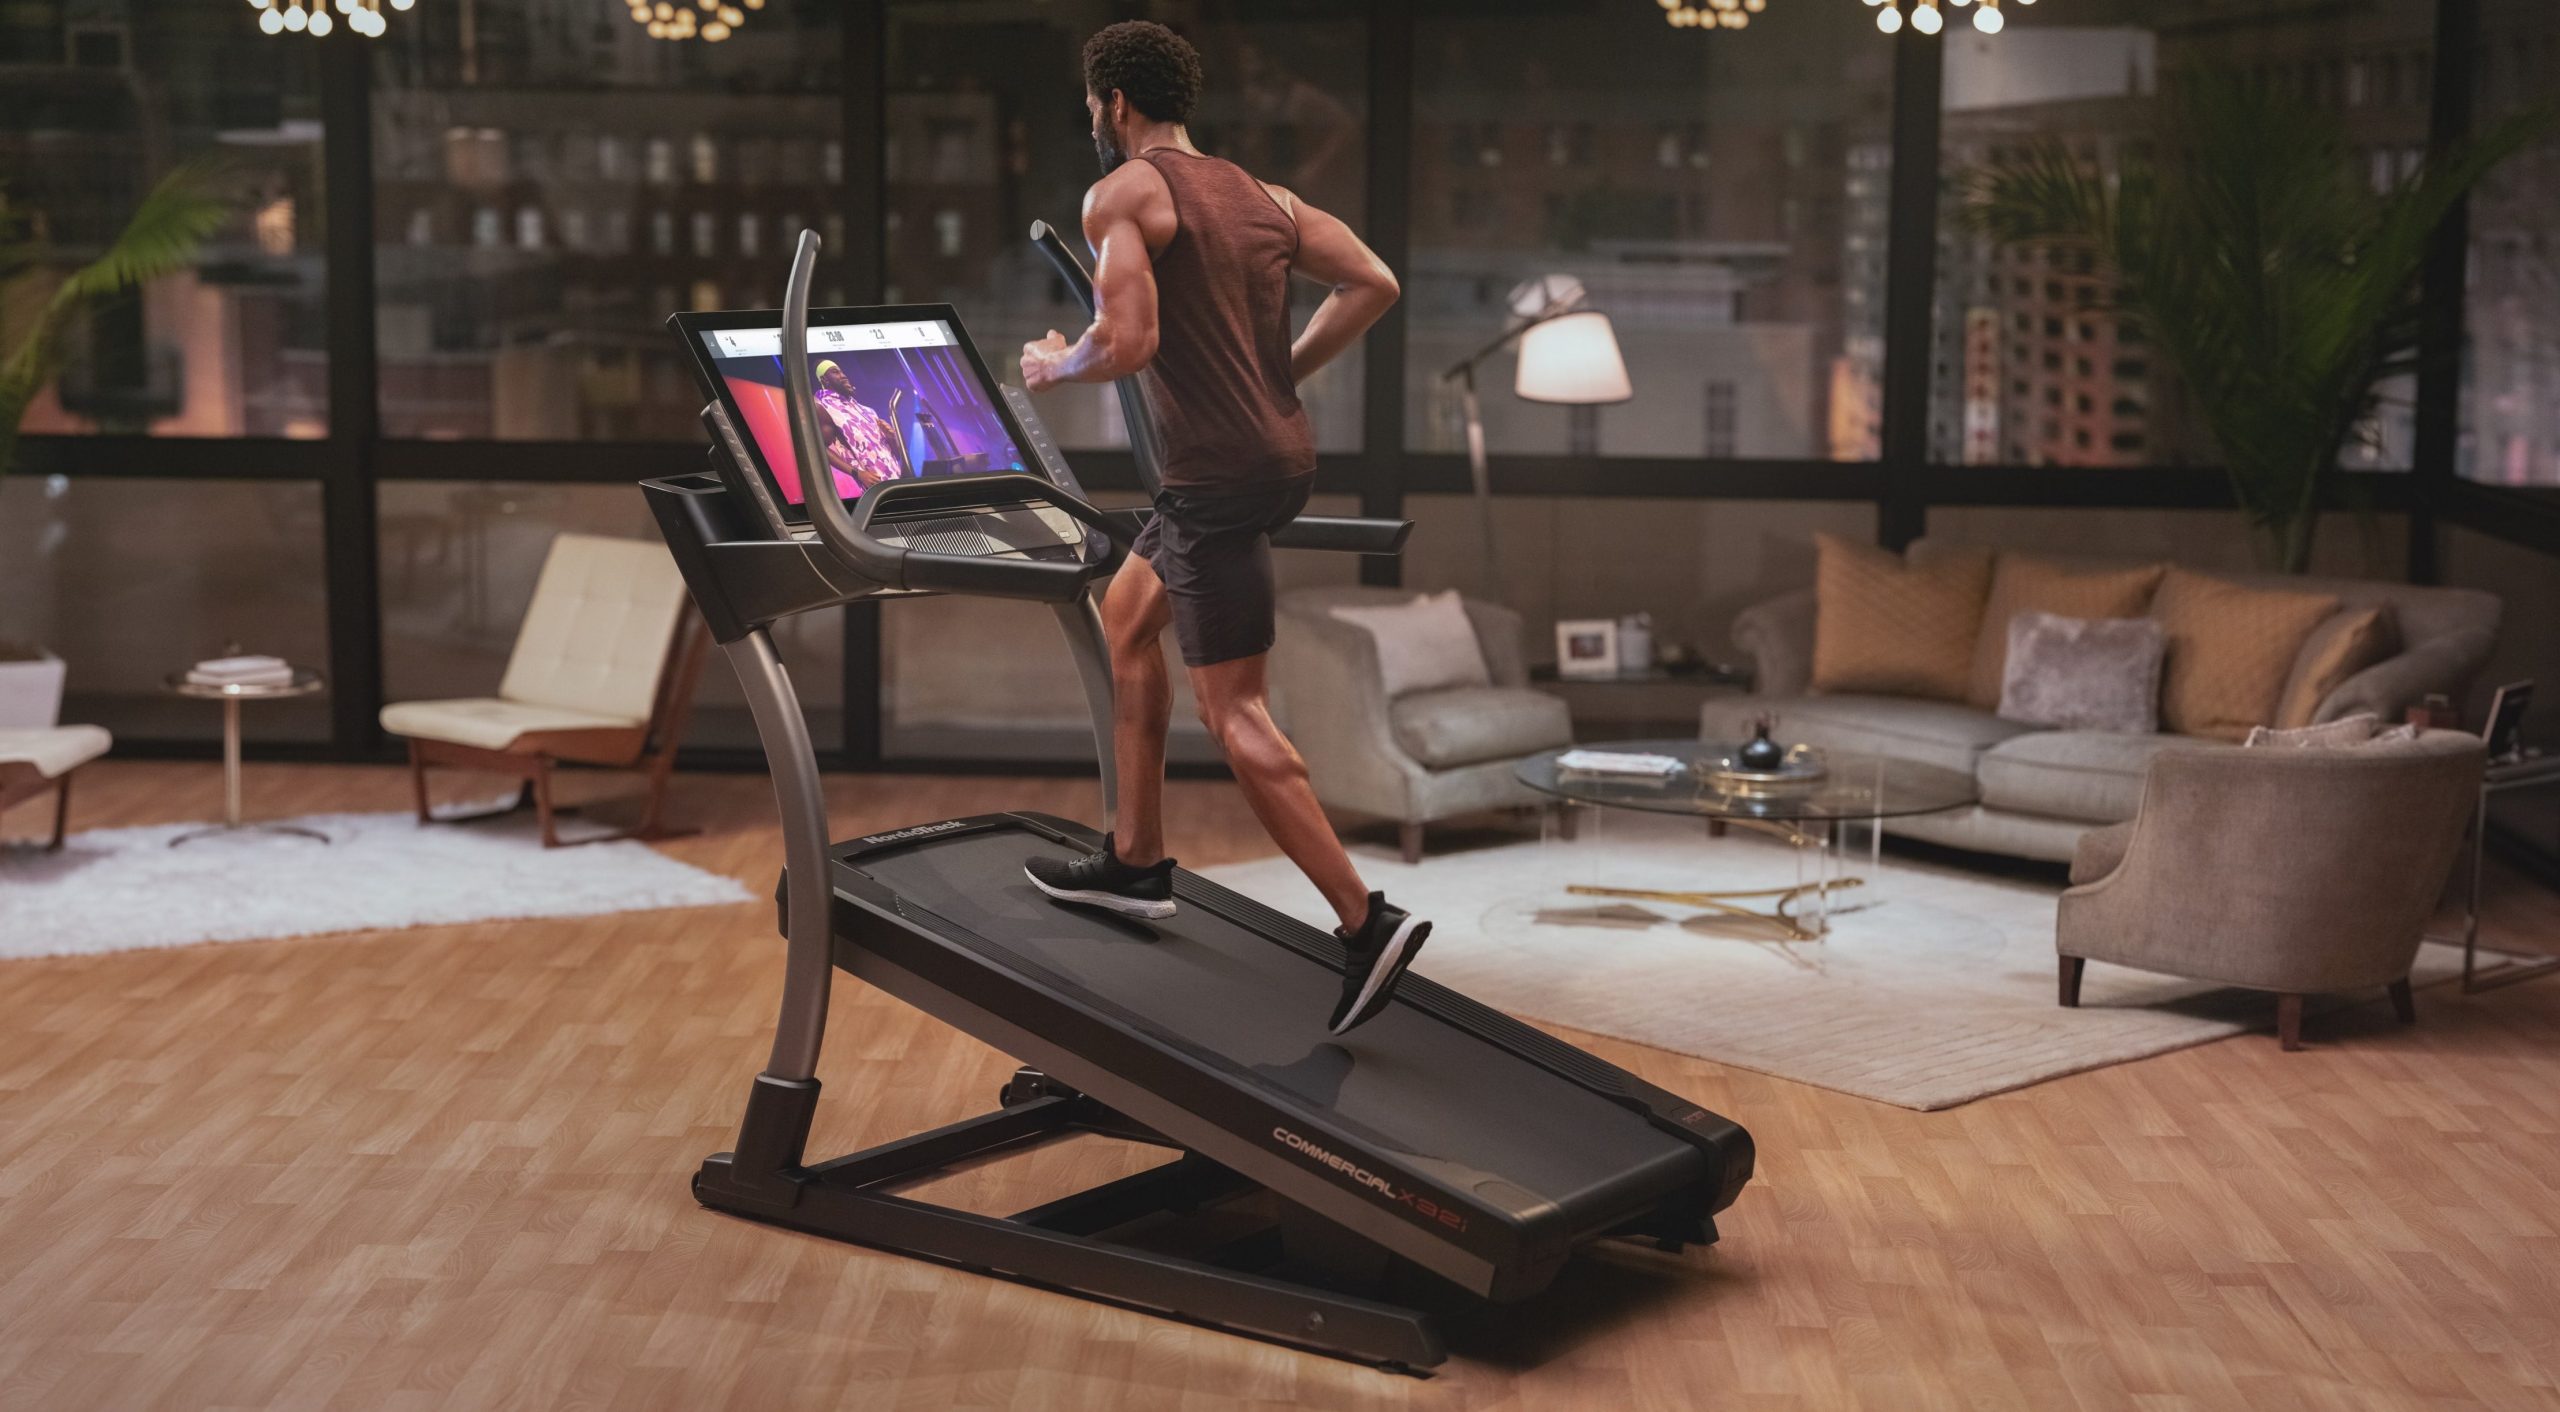 What's New In Online Fitness Equipment Deals?